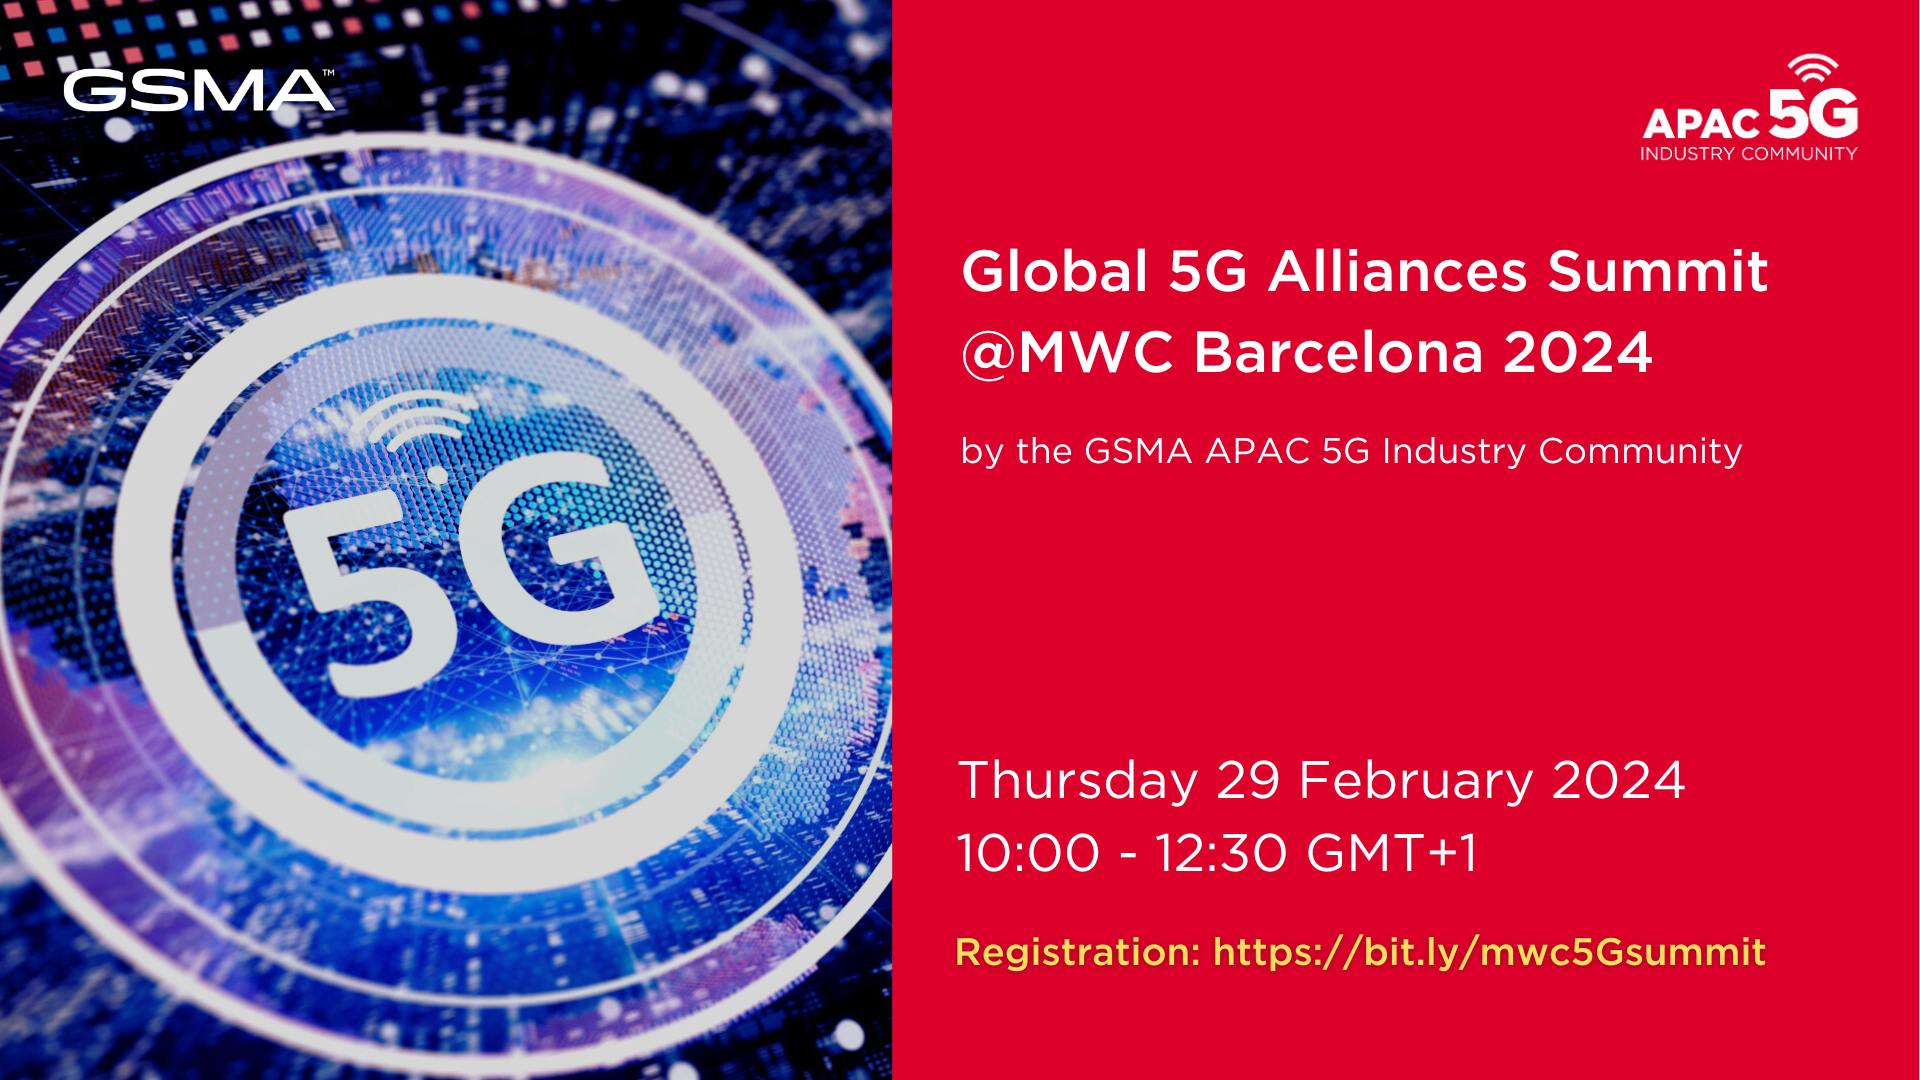 Global 5G Alliances Summit @MWC Barcelona – powered by APAC 5G Industry Community